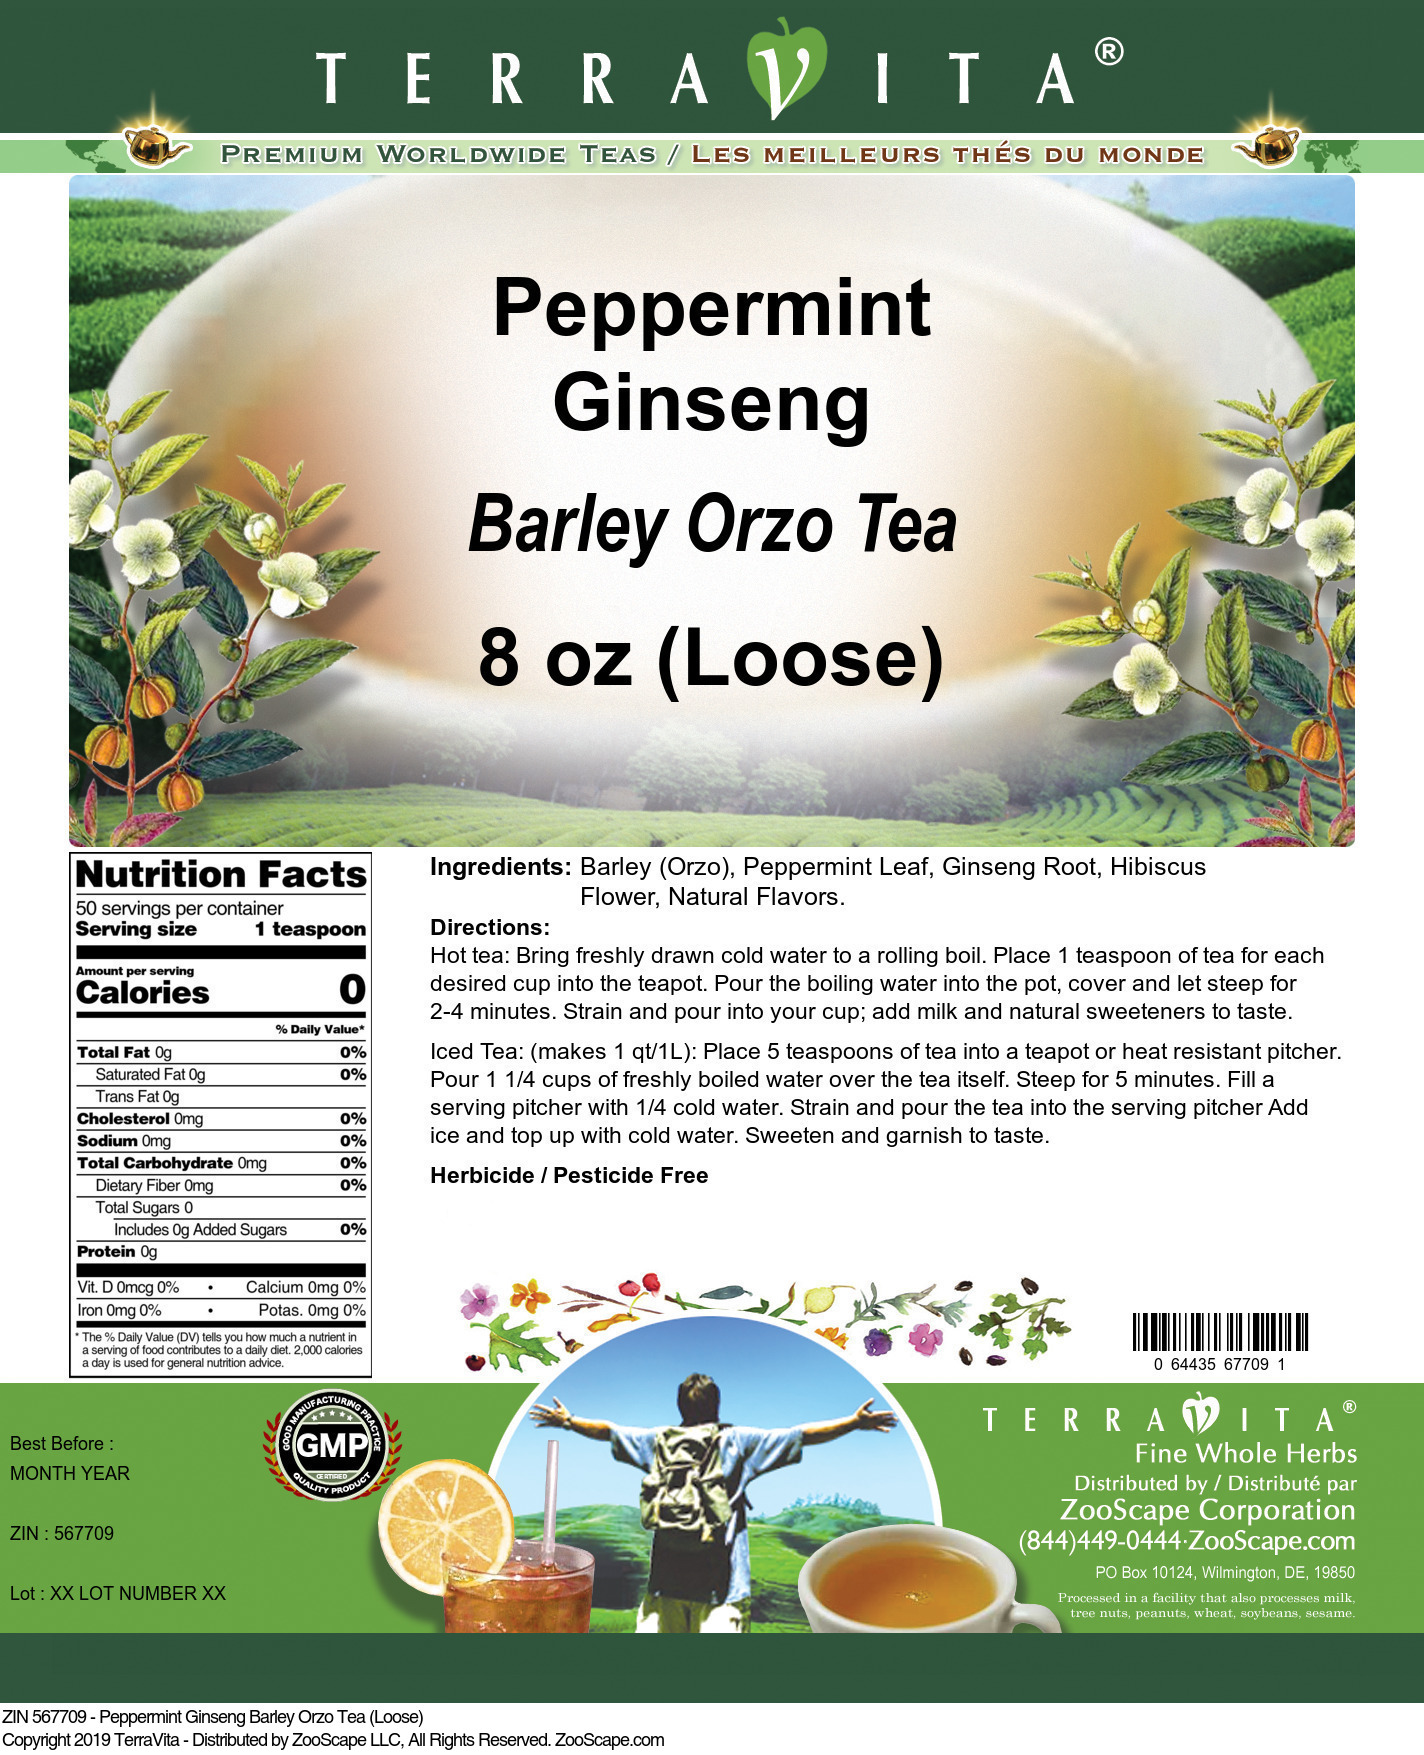 Peppermint Ginseng Barley Orzo Tea (Loose) - Label